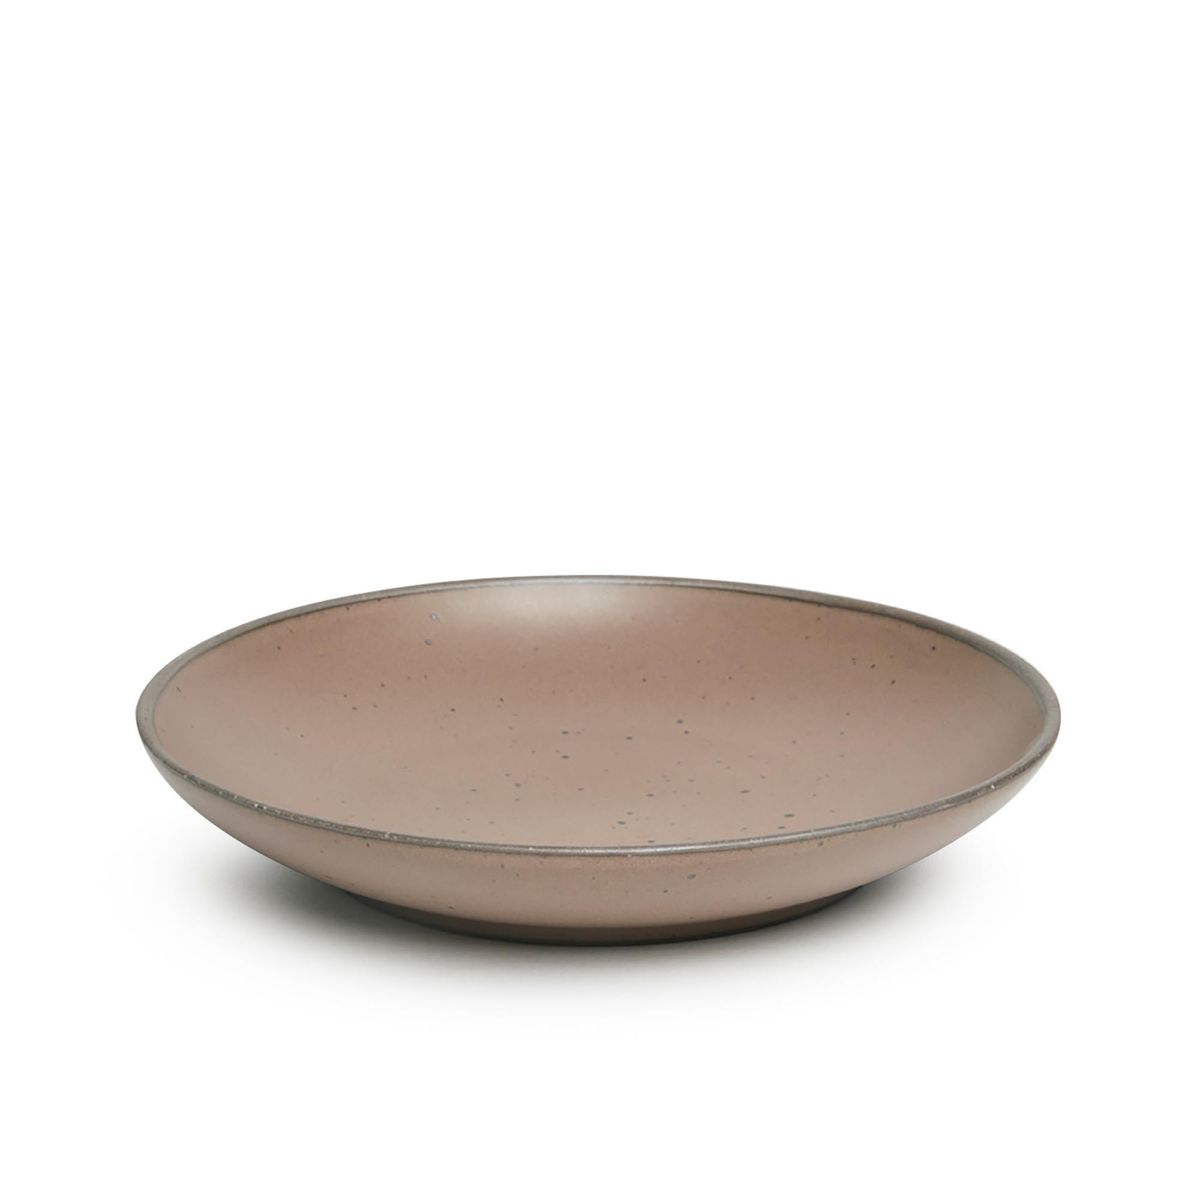 A large ceramic plate with a curved bowl edge in a warm pale brown color featuring iron speckles and an unglazed rim.